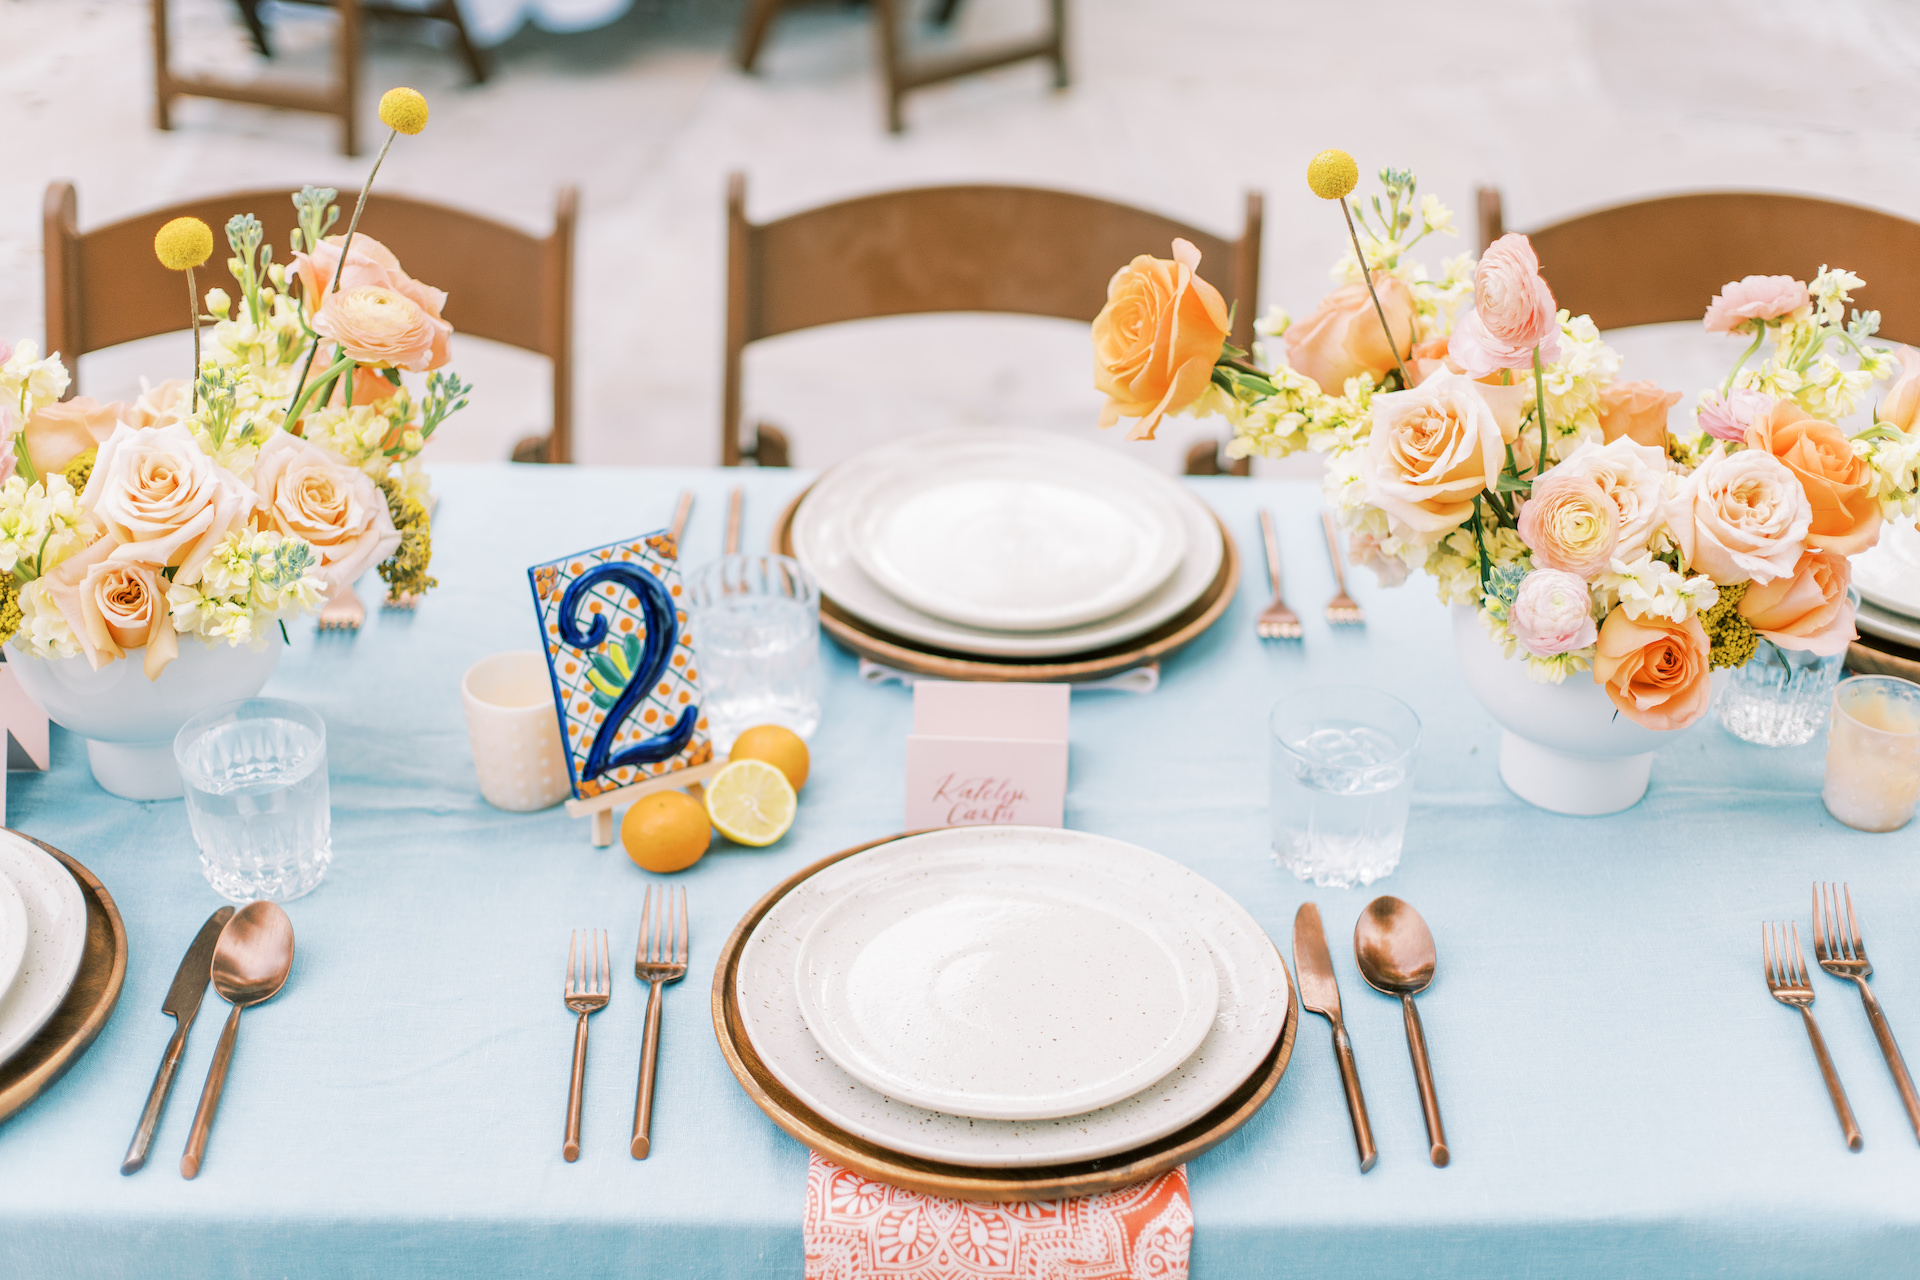 Wedding reception table with place settings, floral centerpieces and table number.